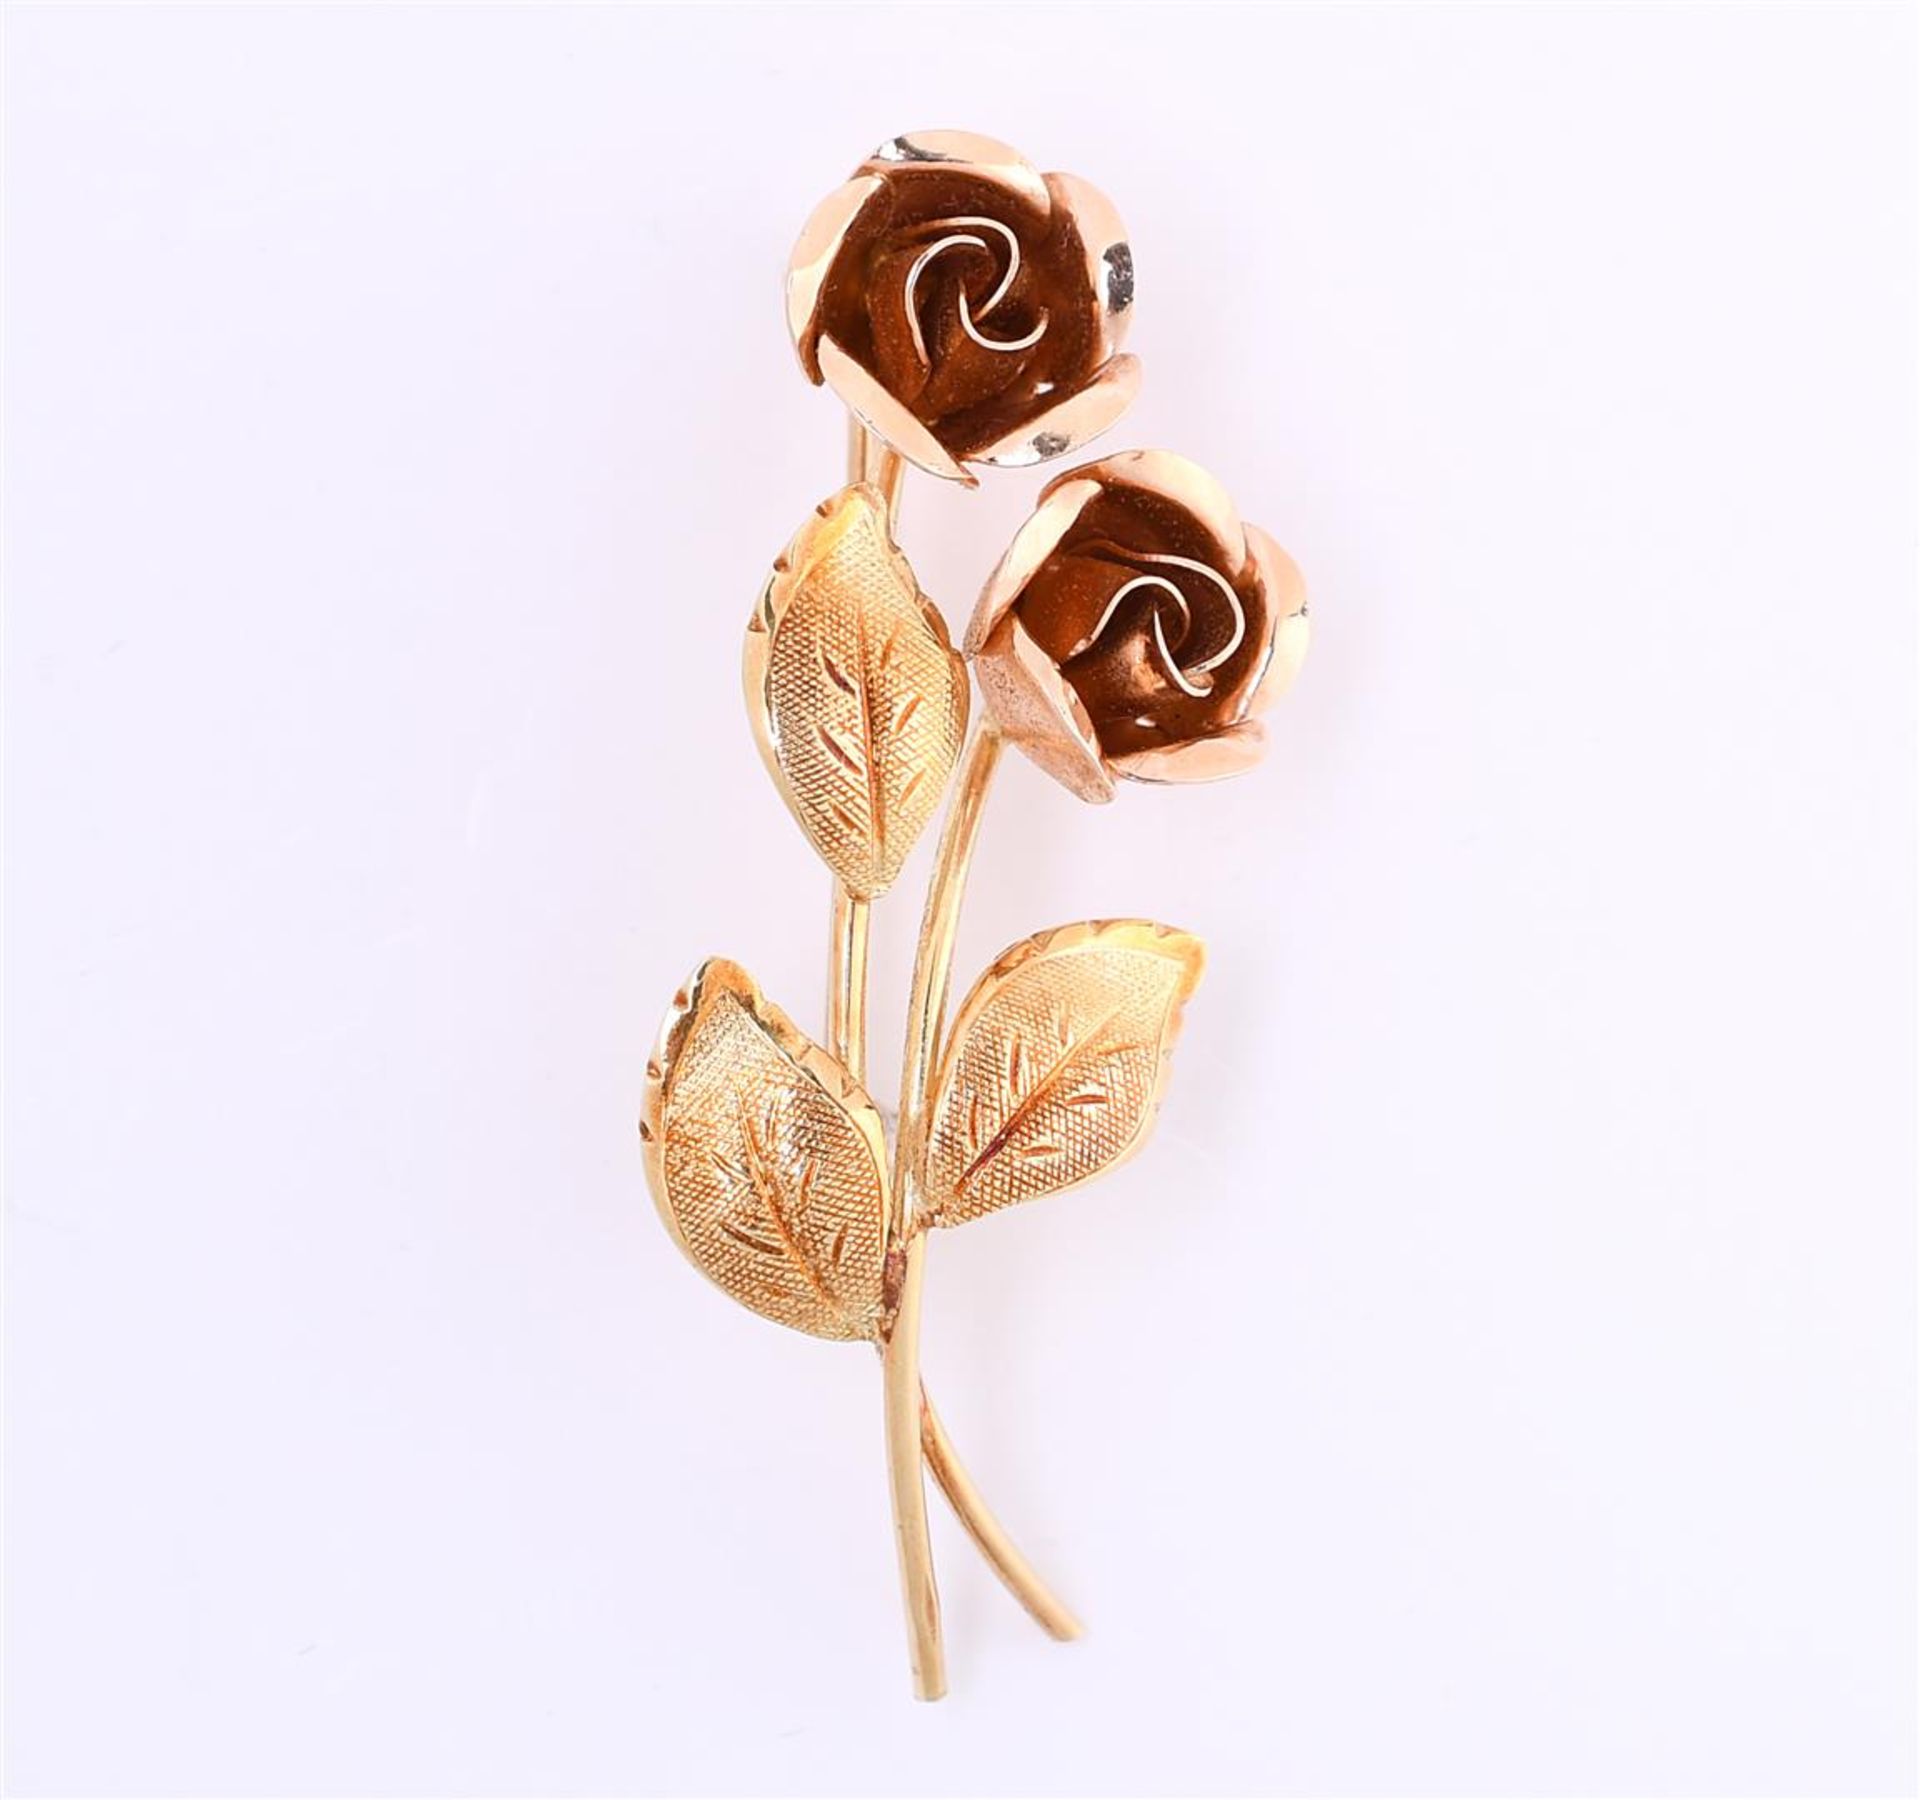 14 kt bicolor gold rose brooch, in the gold colors rose and yellow gold